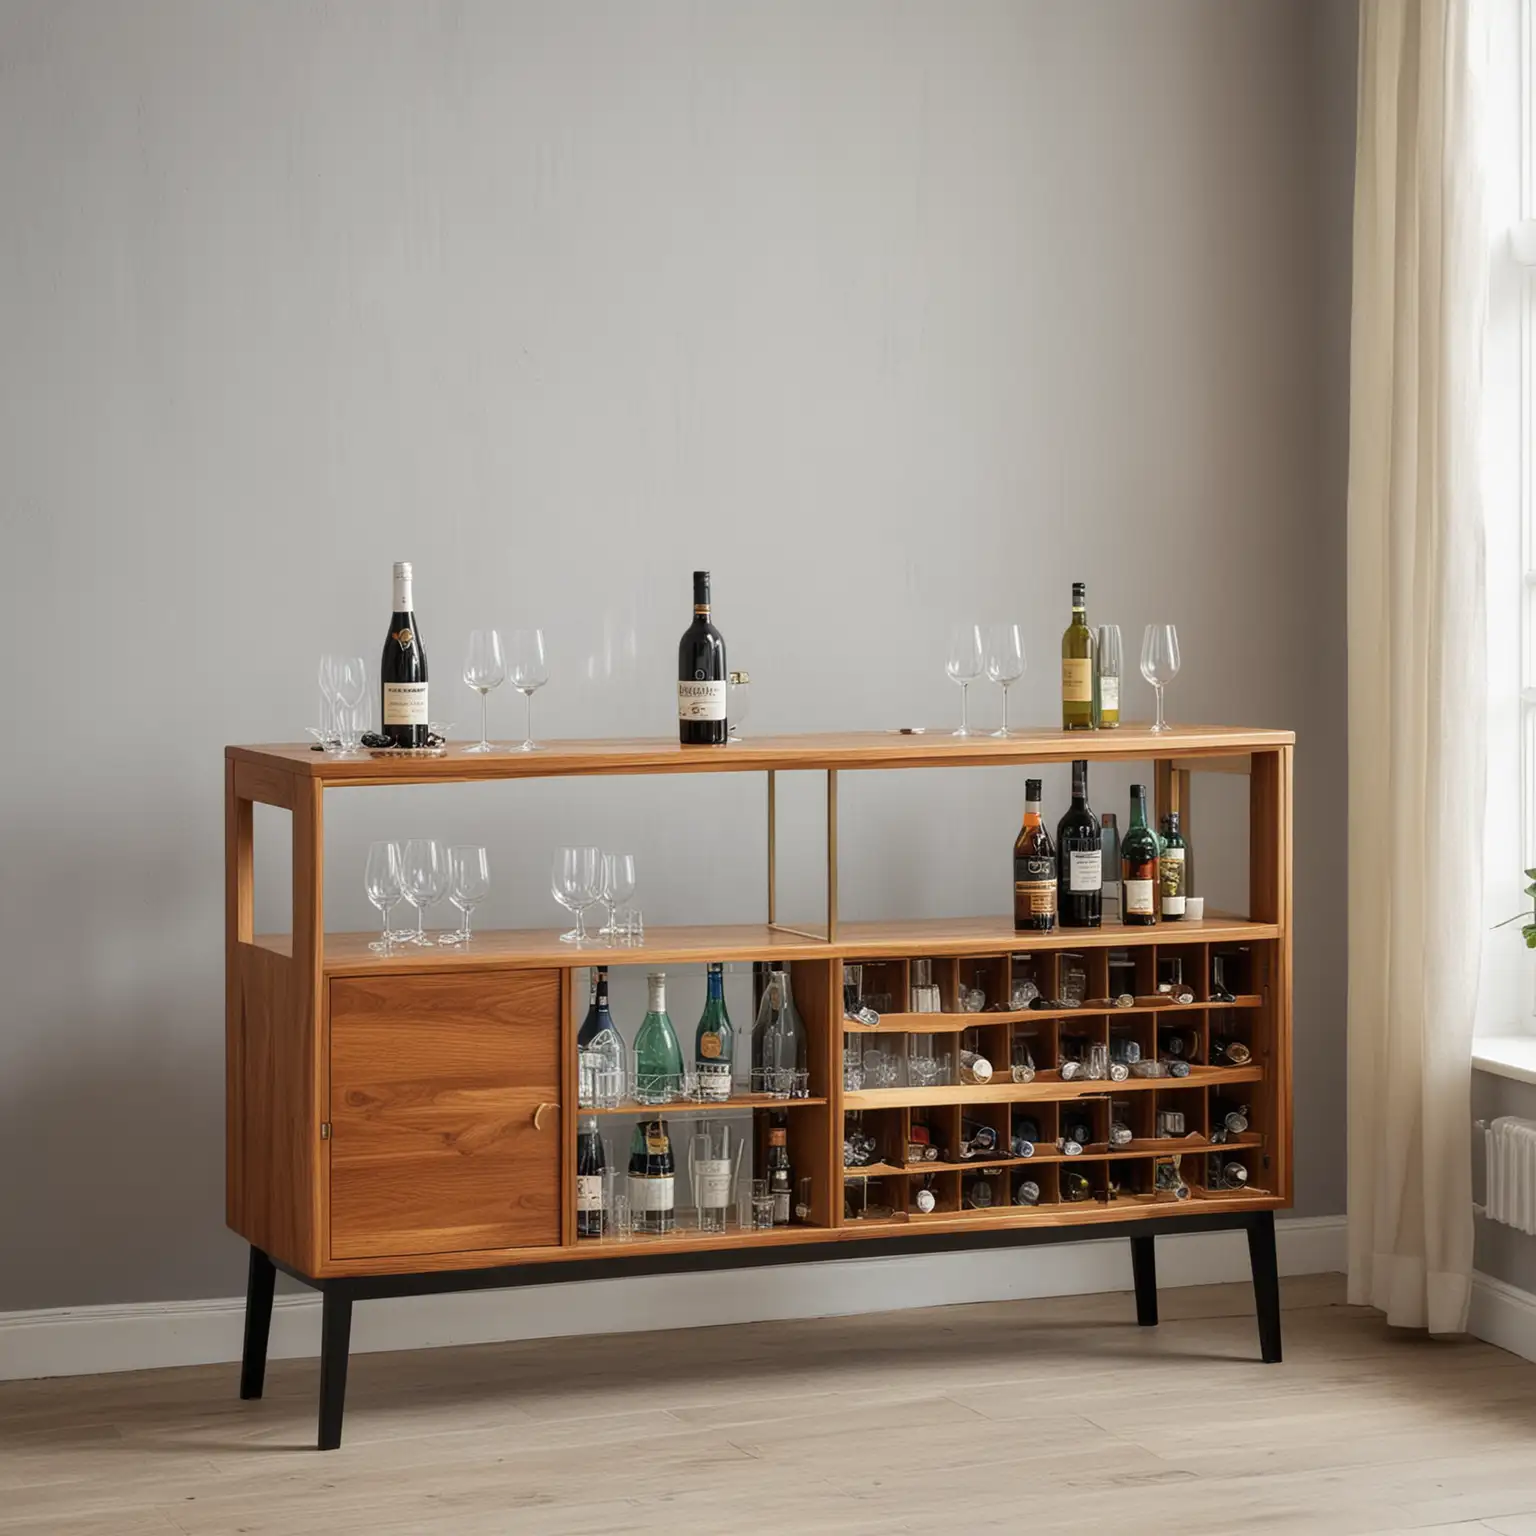 design a bar table (90cm) with some storage and open areas for glasses and bottles. Not too wide and in midcentury style. to be placed by a large window